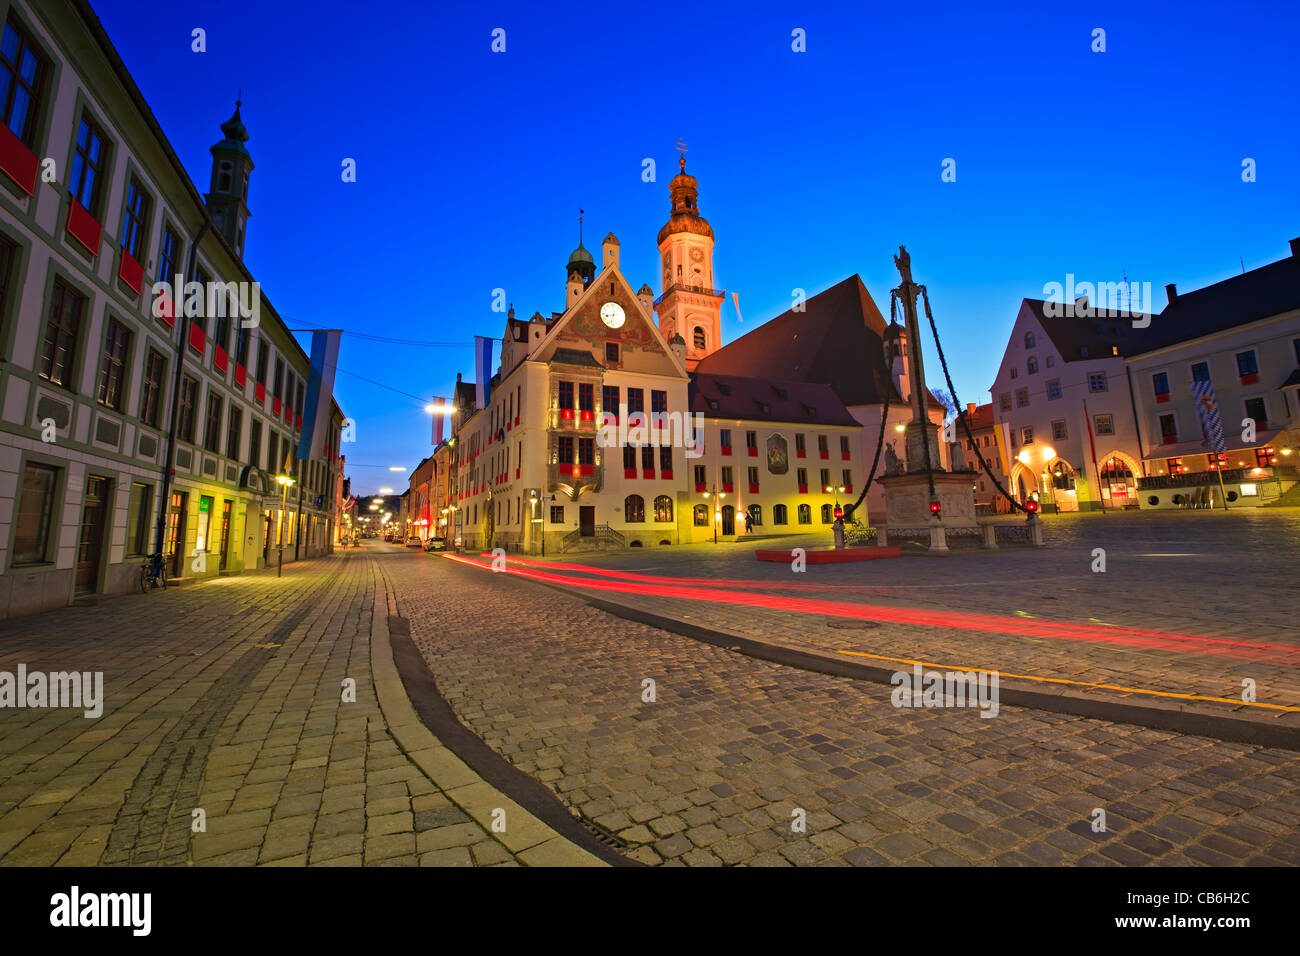 Facade of the medieval city of Freising Rathaus (Town Hall) and bell tower of St George's Church in the Marienplatz seen from alo Stock Photo